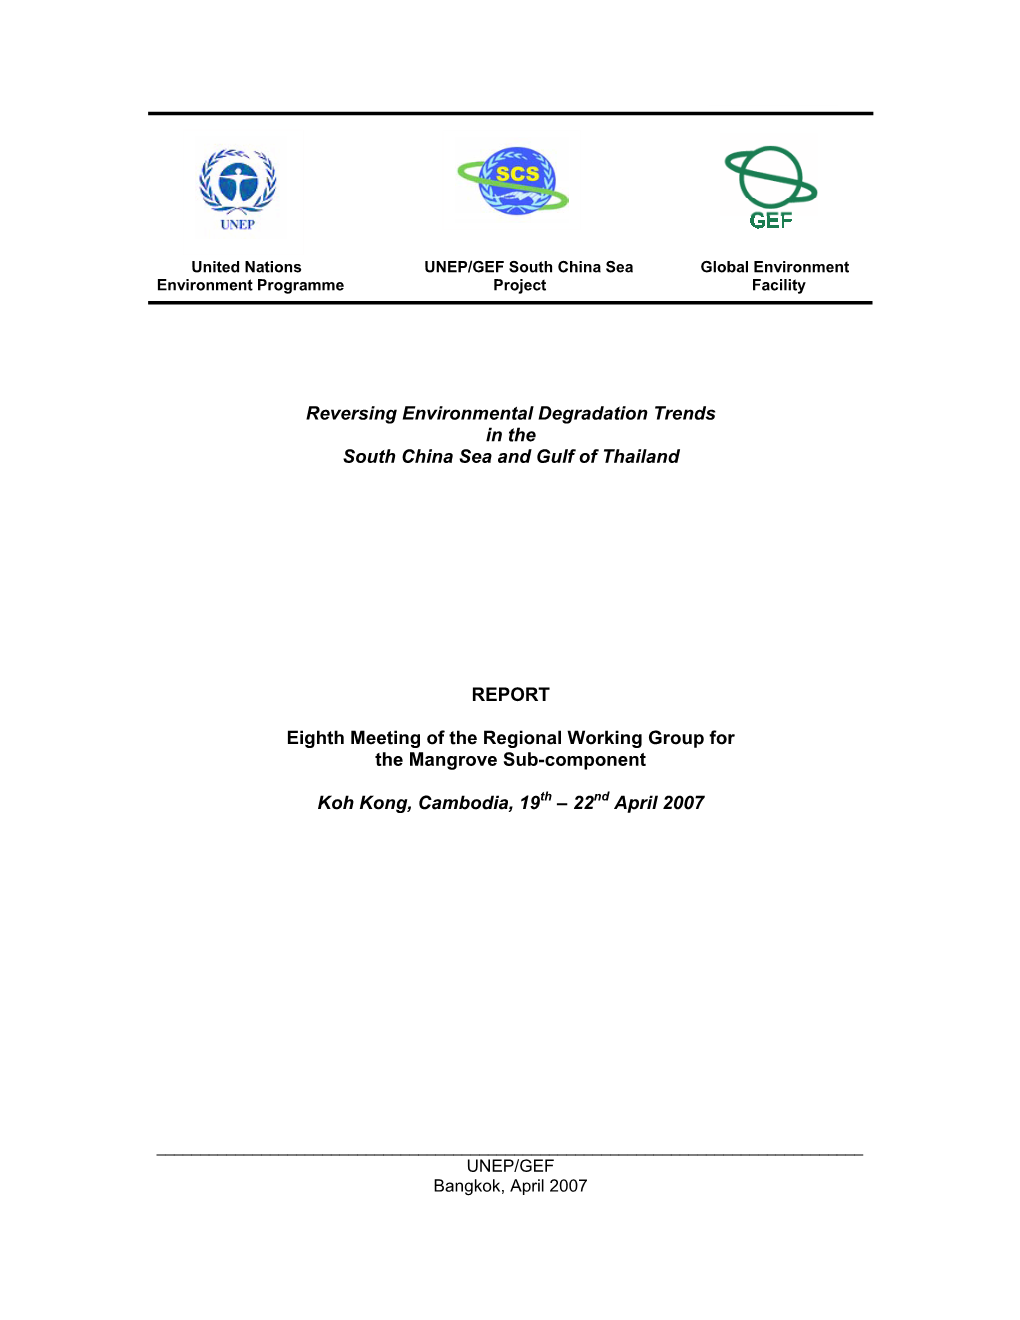 Reversing Environmental Degradation Trends in the South China Sea and Gulf of Thailand